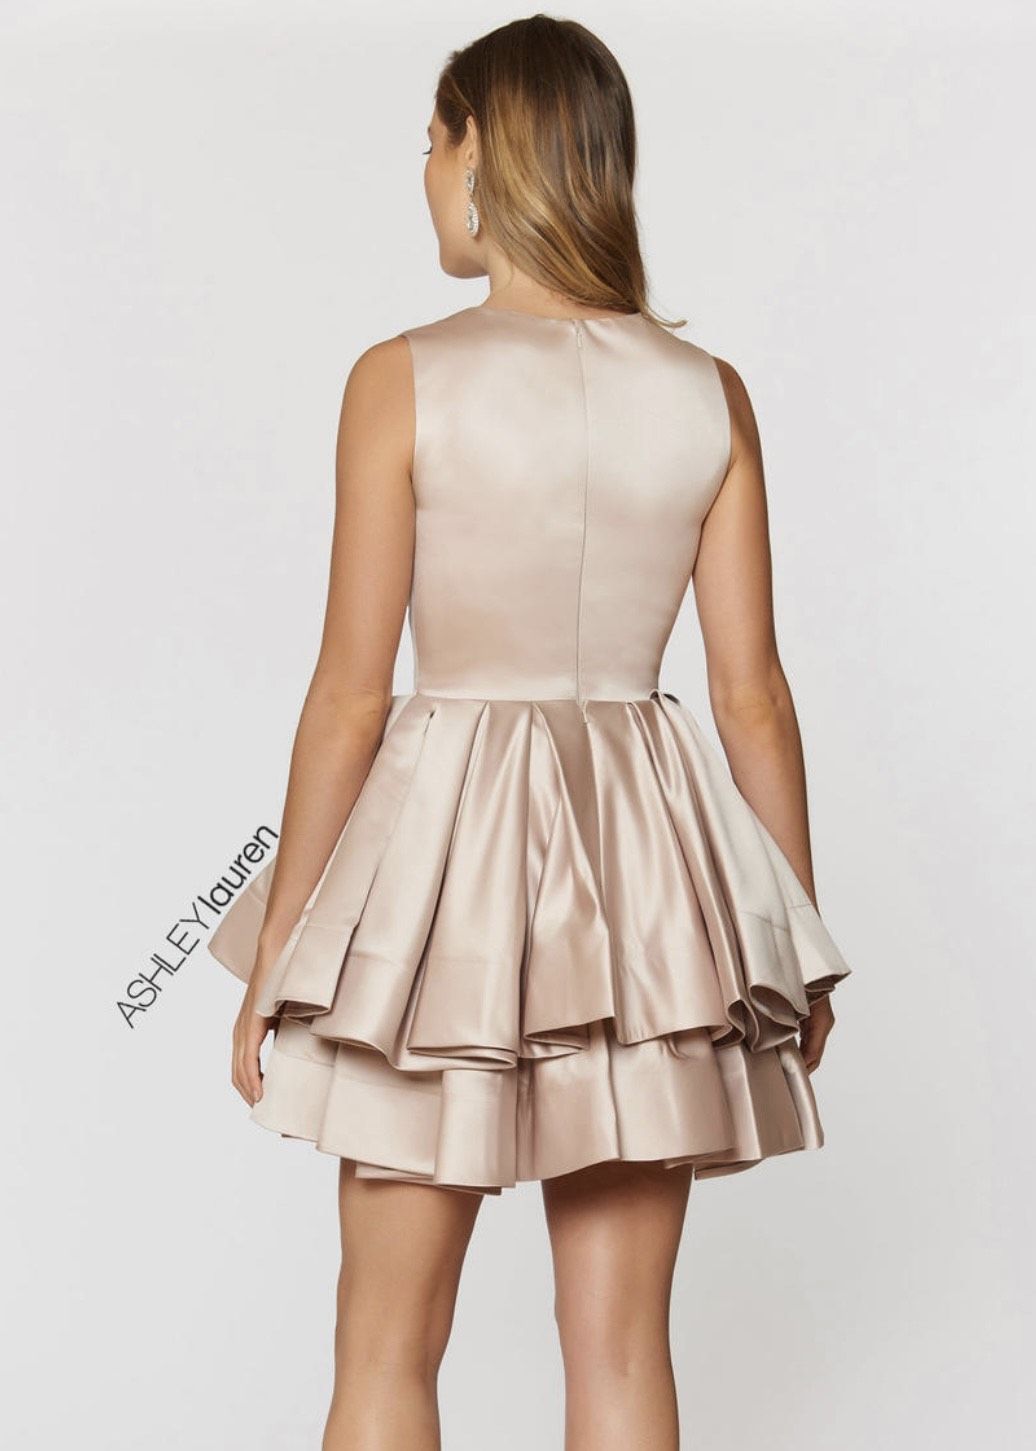 Ashley Lauren Size 10 Homecoming Nude Cocktail Dress on Queenly